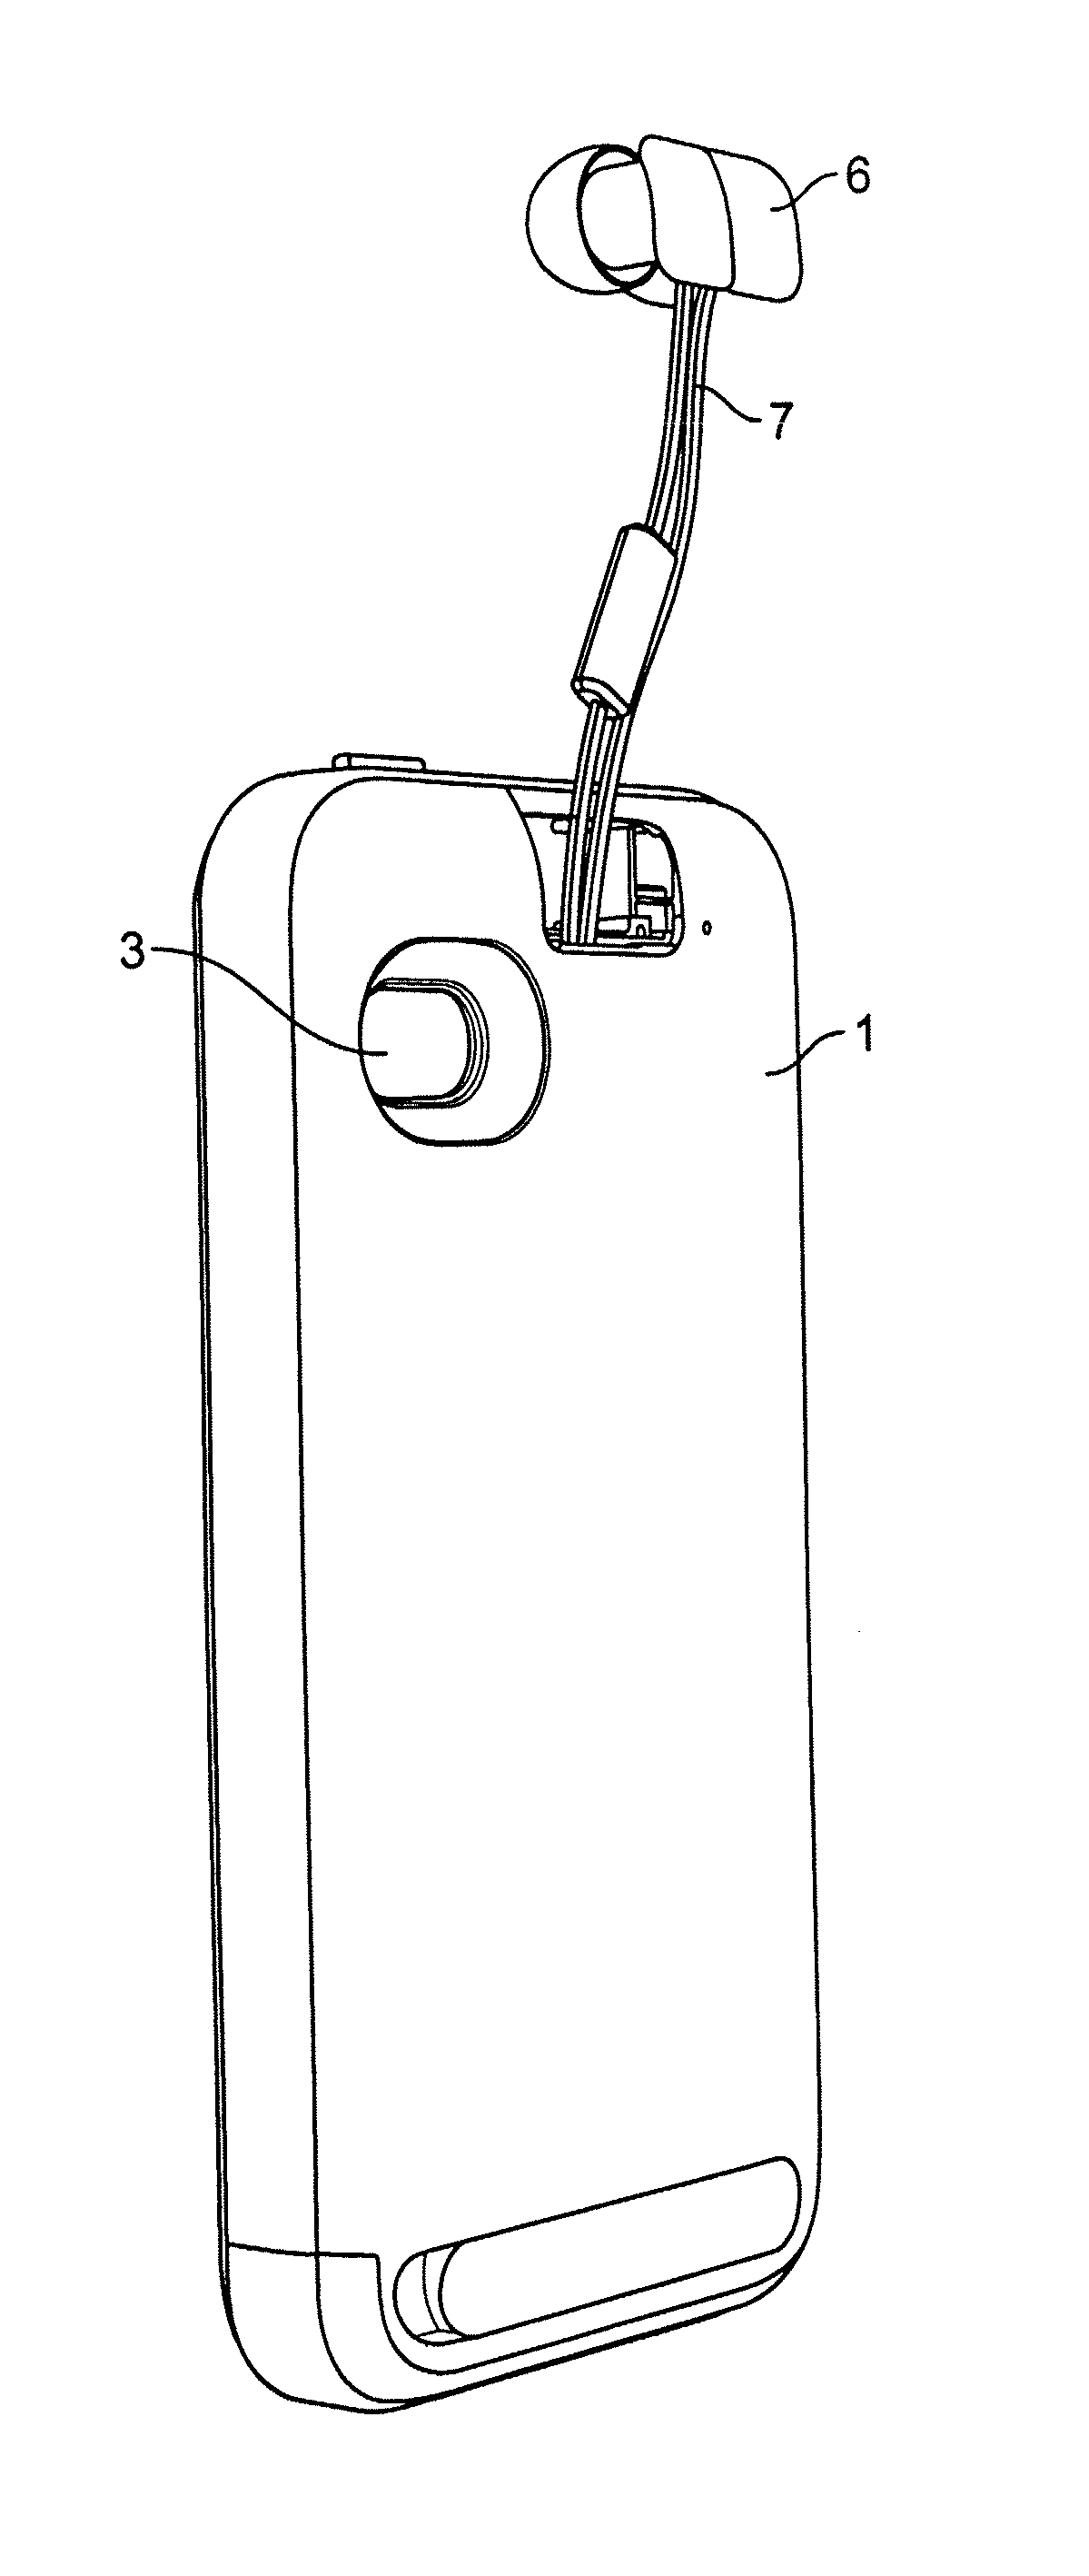 Health risk mitigating, retractable, wired headset and protective case platform for wireless communication devices